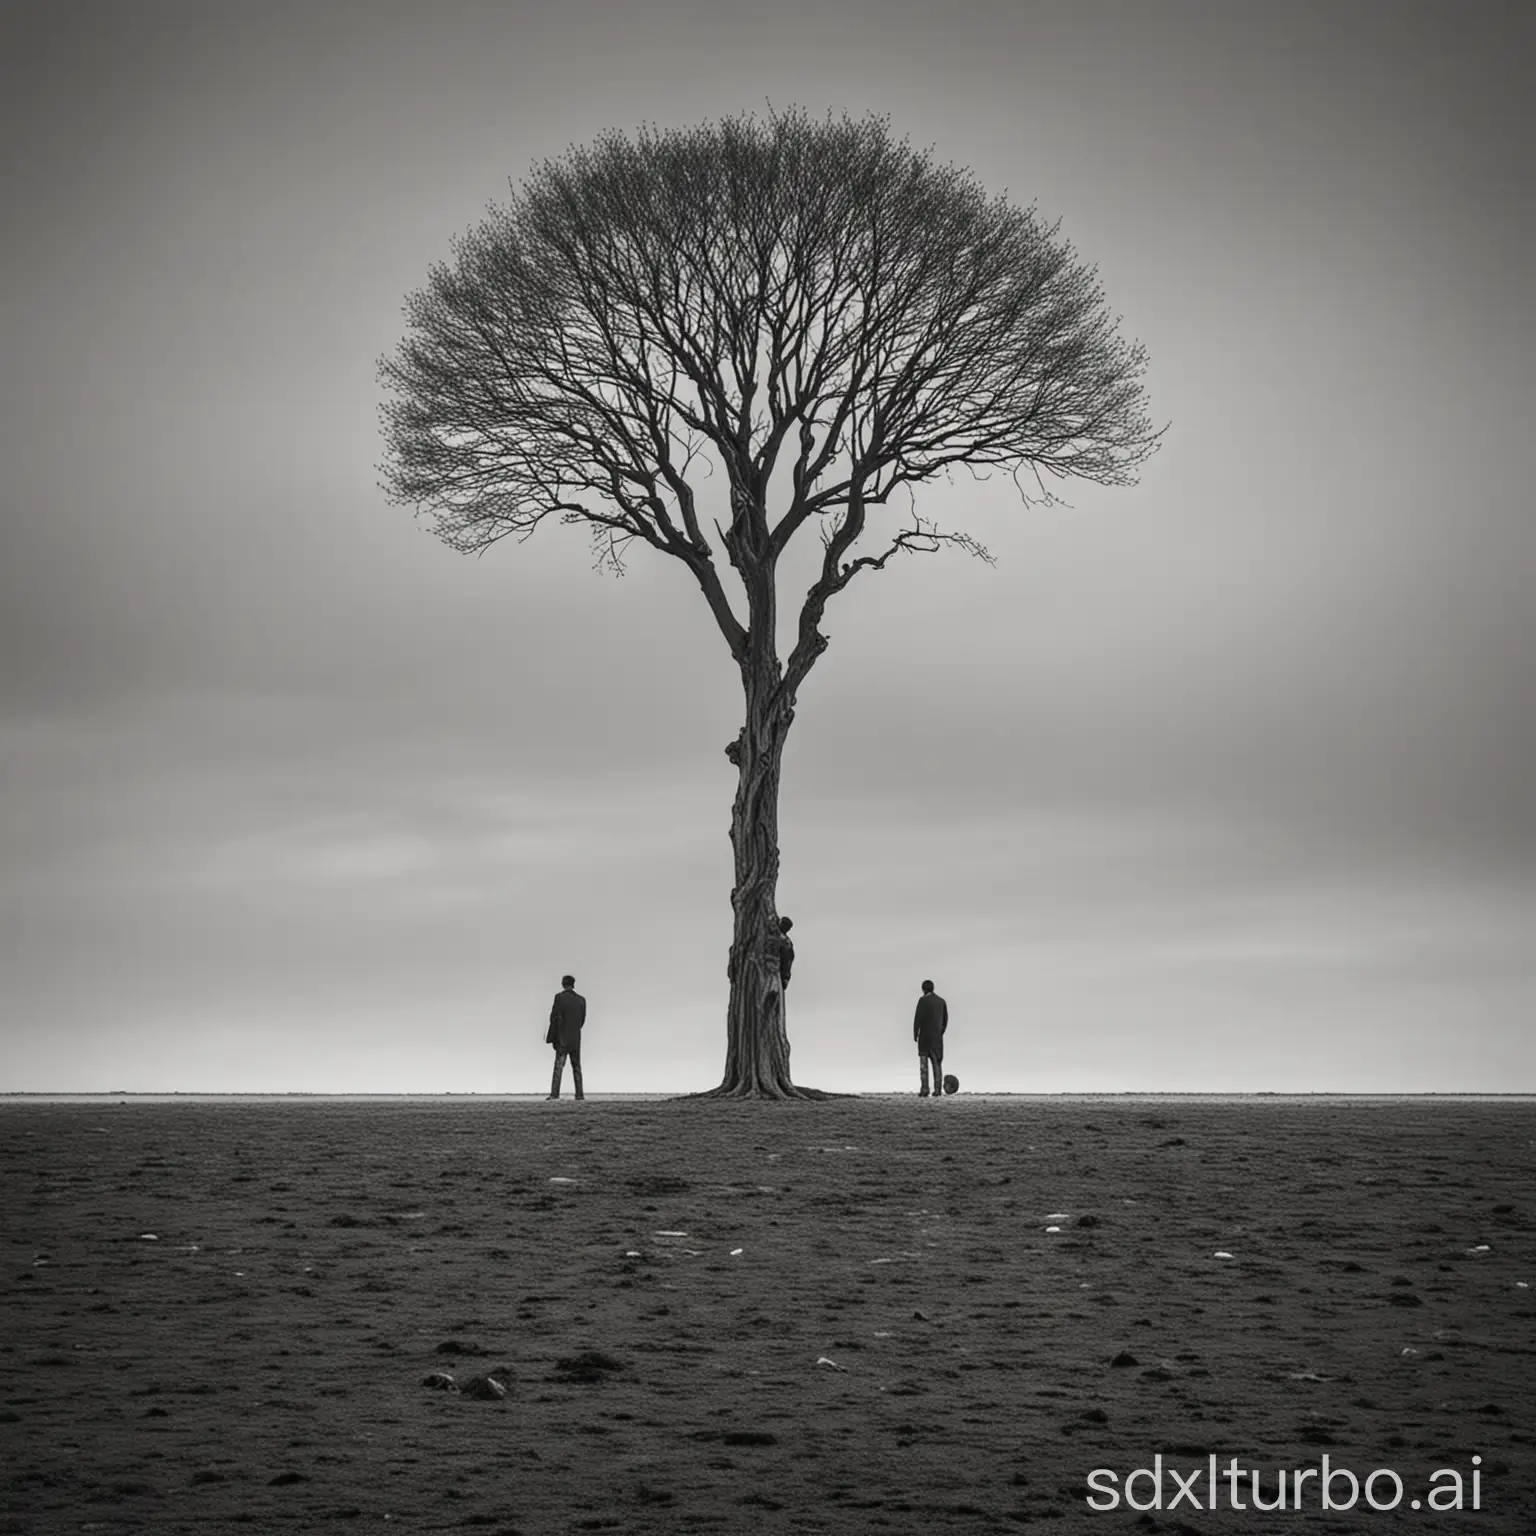 A tree with just two man alone in empty place